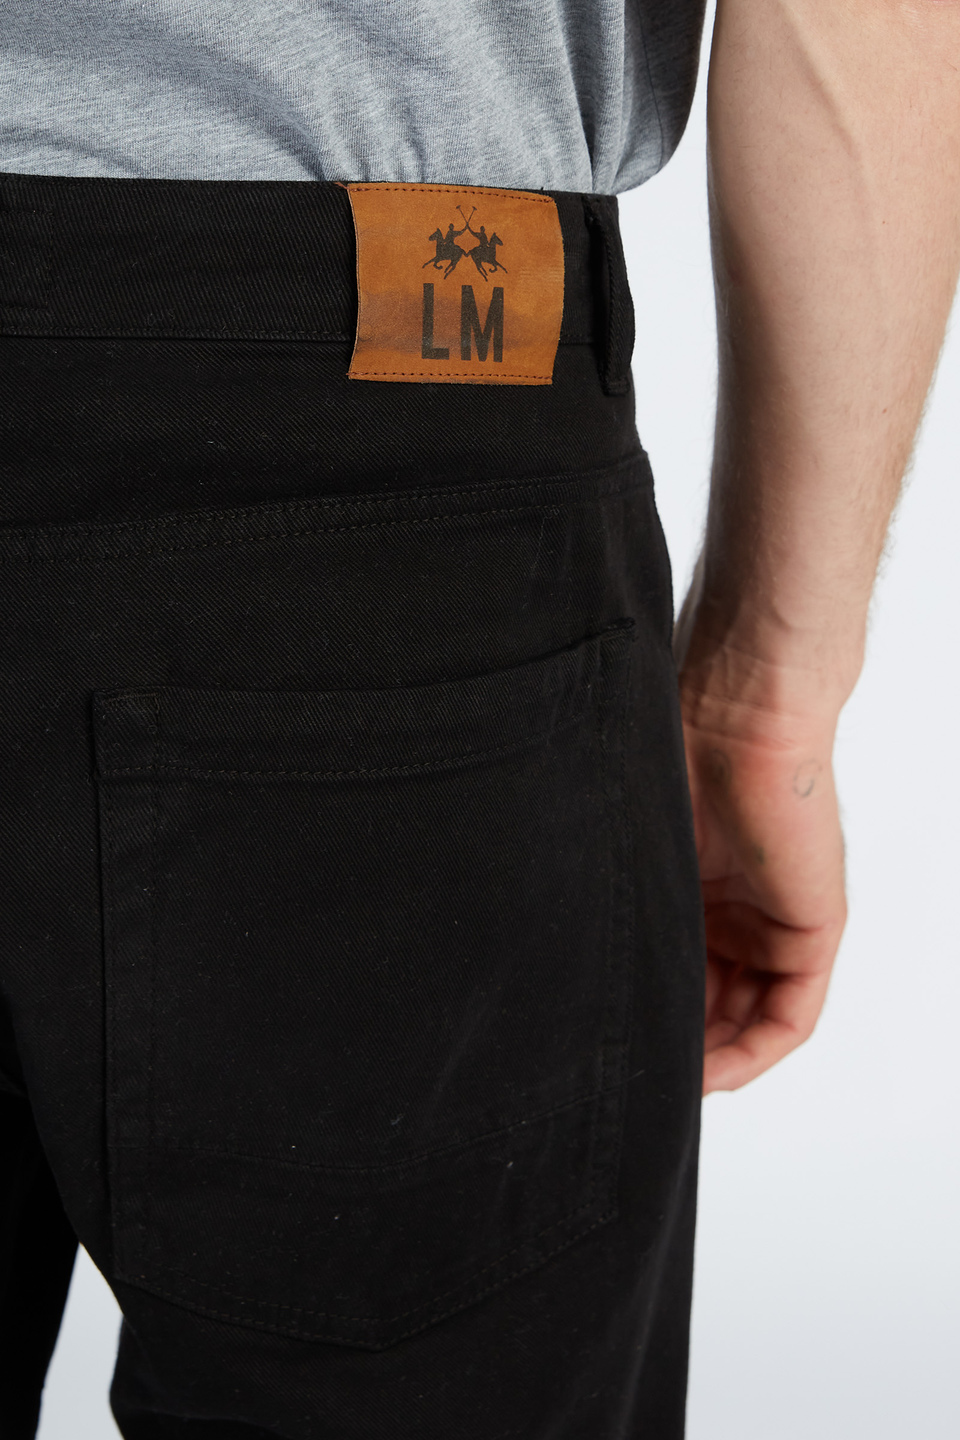 Men’s trousers in stretch cotton regular fit chino model | La Martina - Official Online Shop